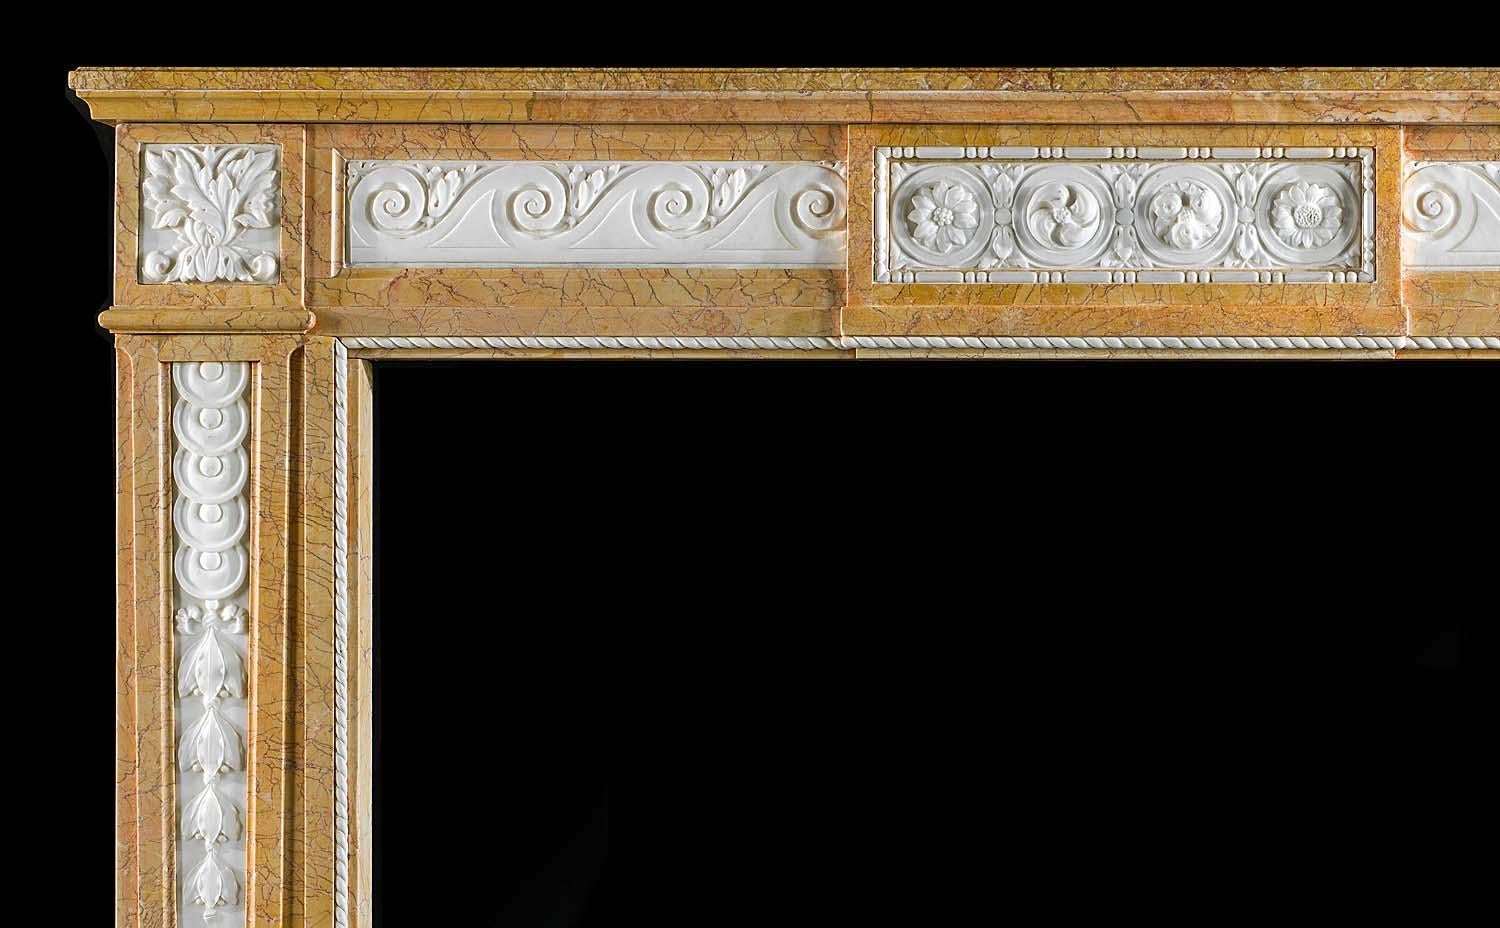 Louis XVI Antique Chimneypiece Carved in Statuary and Crema Valencua Marble